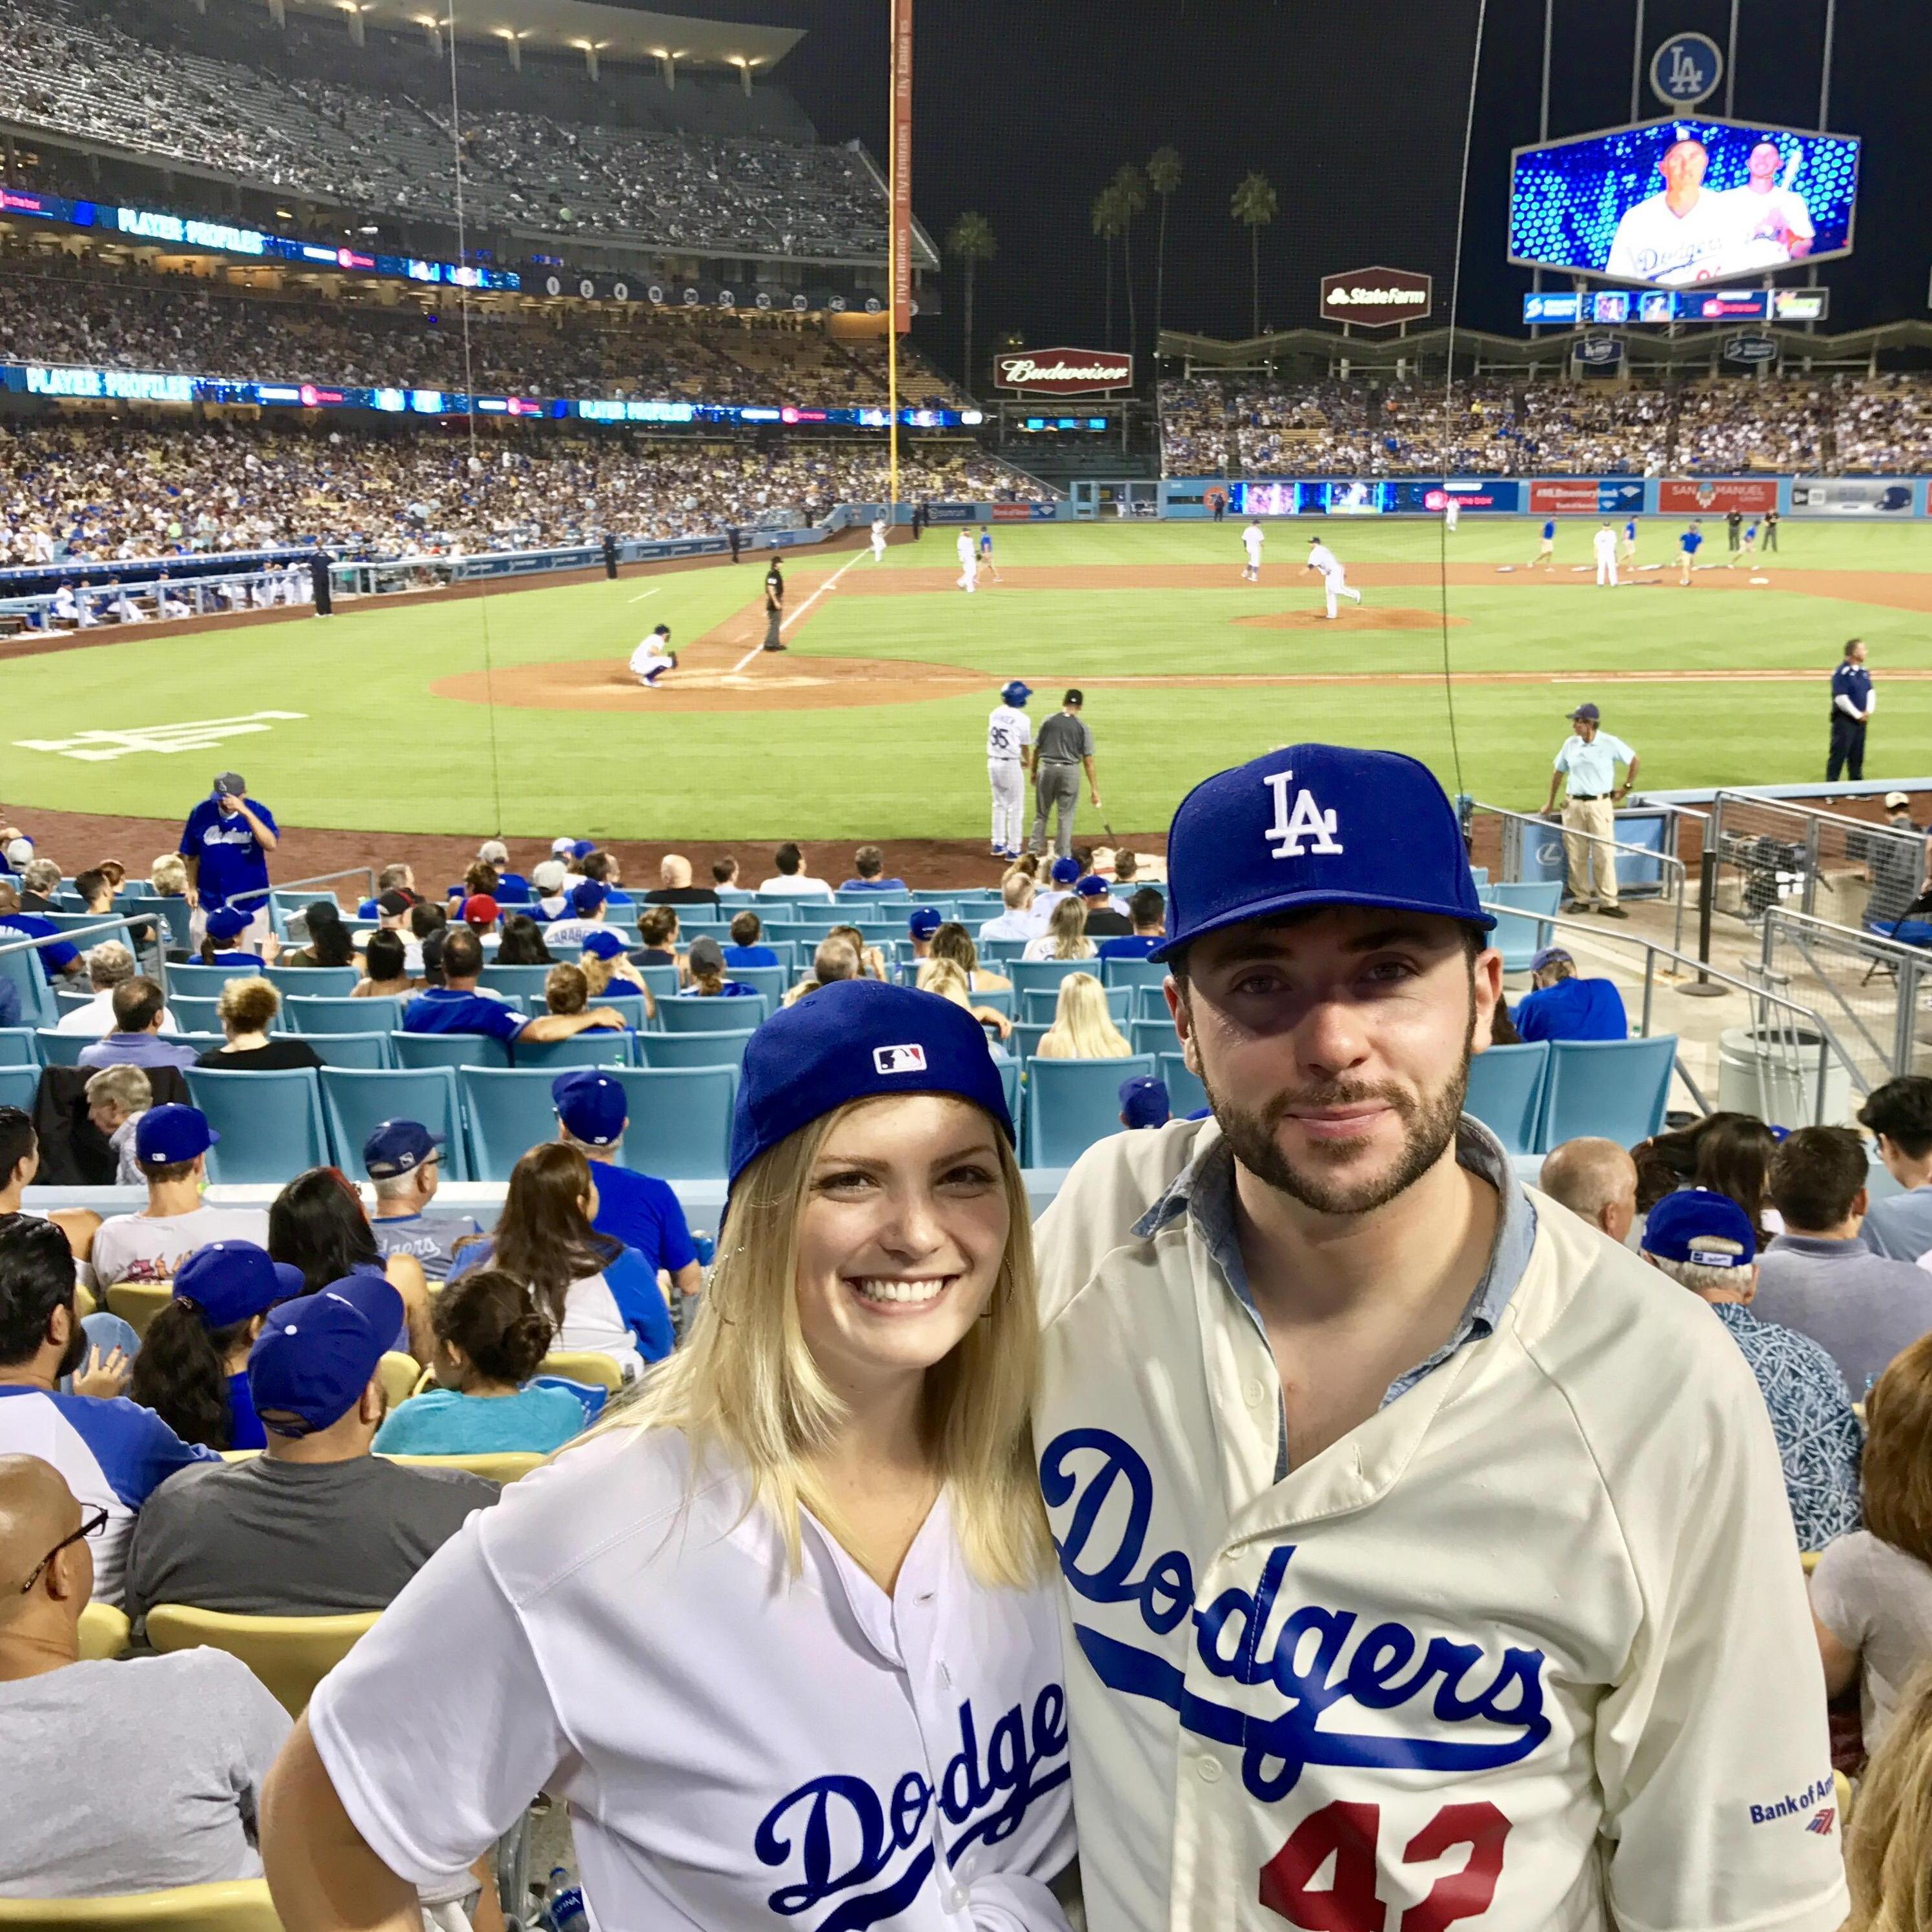 Blair's first-ever Dodgers game in LA
2017